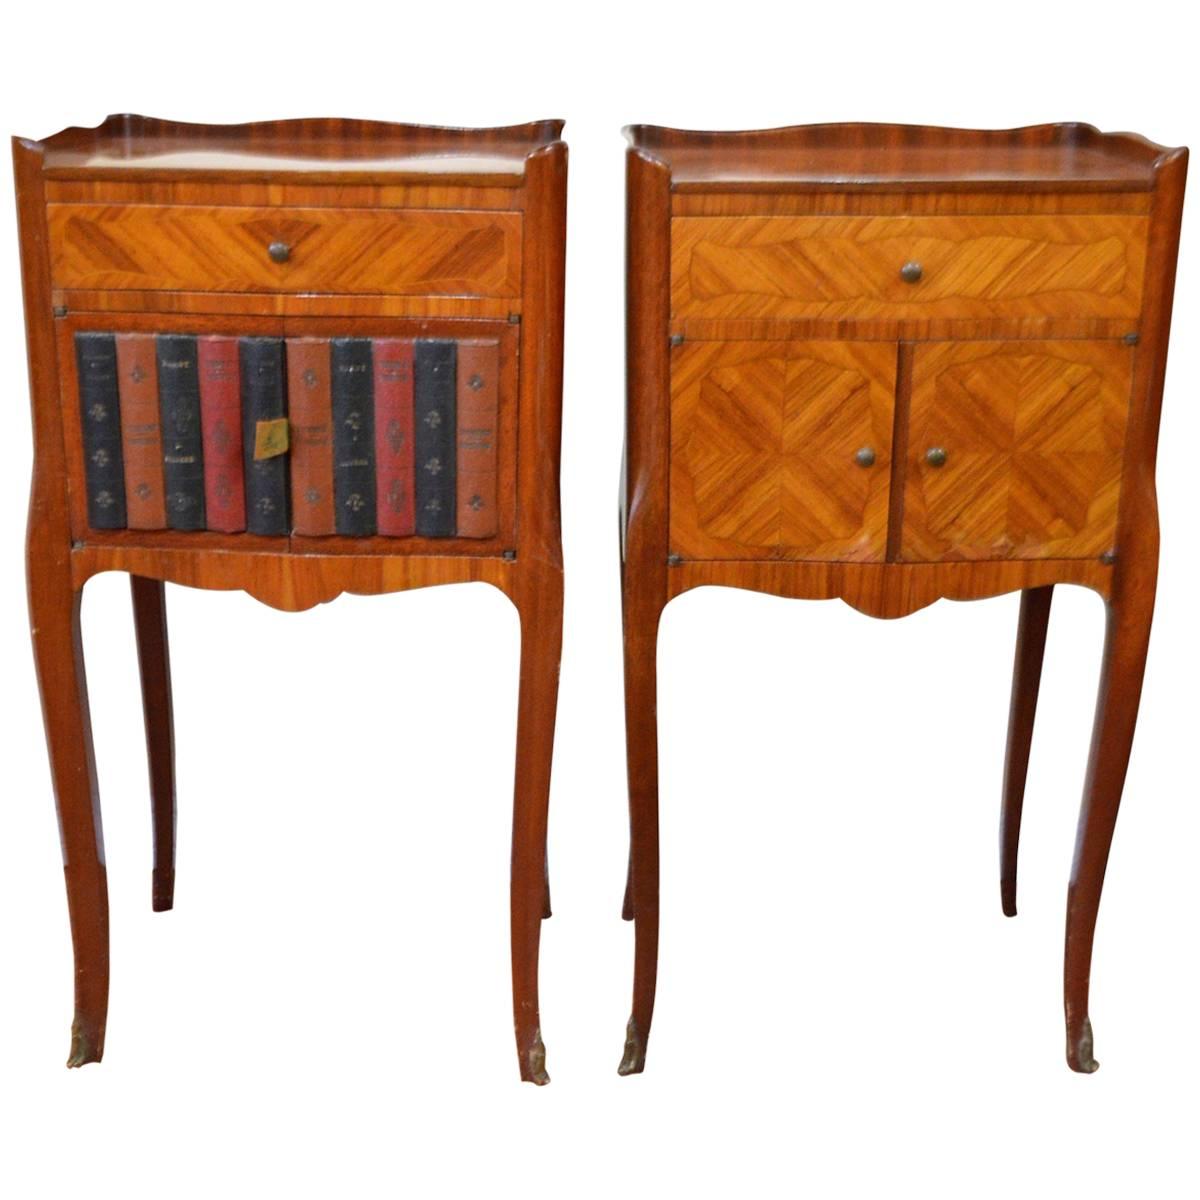 Pair of Transitional Inlay Wood Side Tables One with Faux Leather Books Exterior